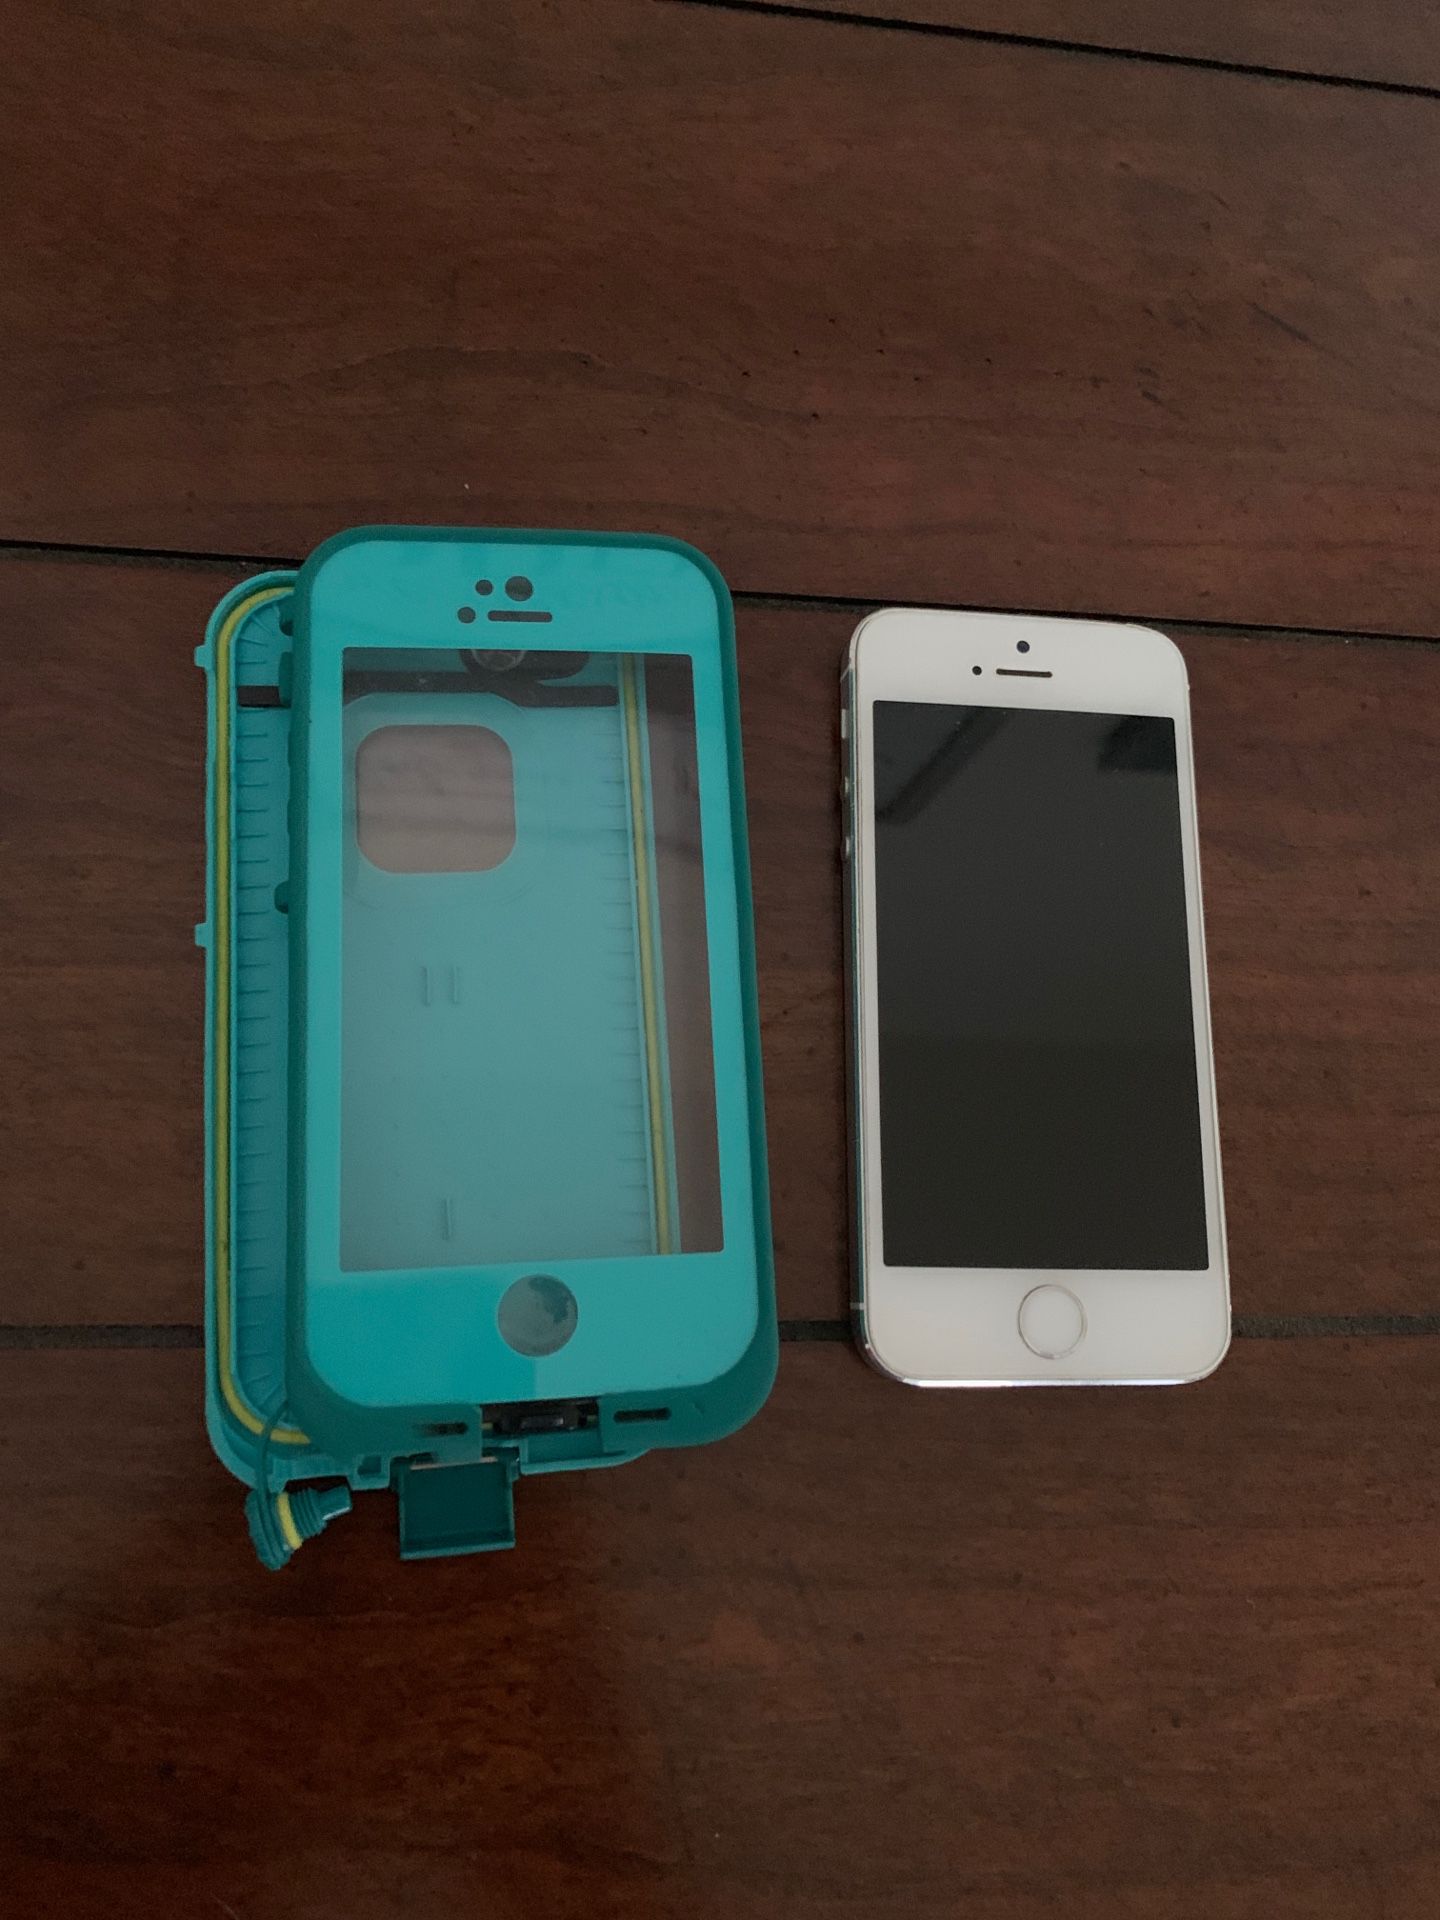 IPhone 5s with life proof case, works perfectly, UNLOCKED!